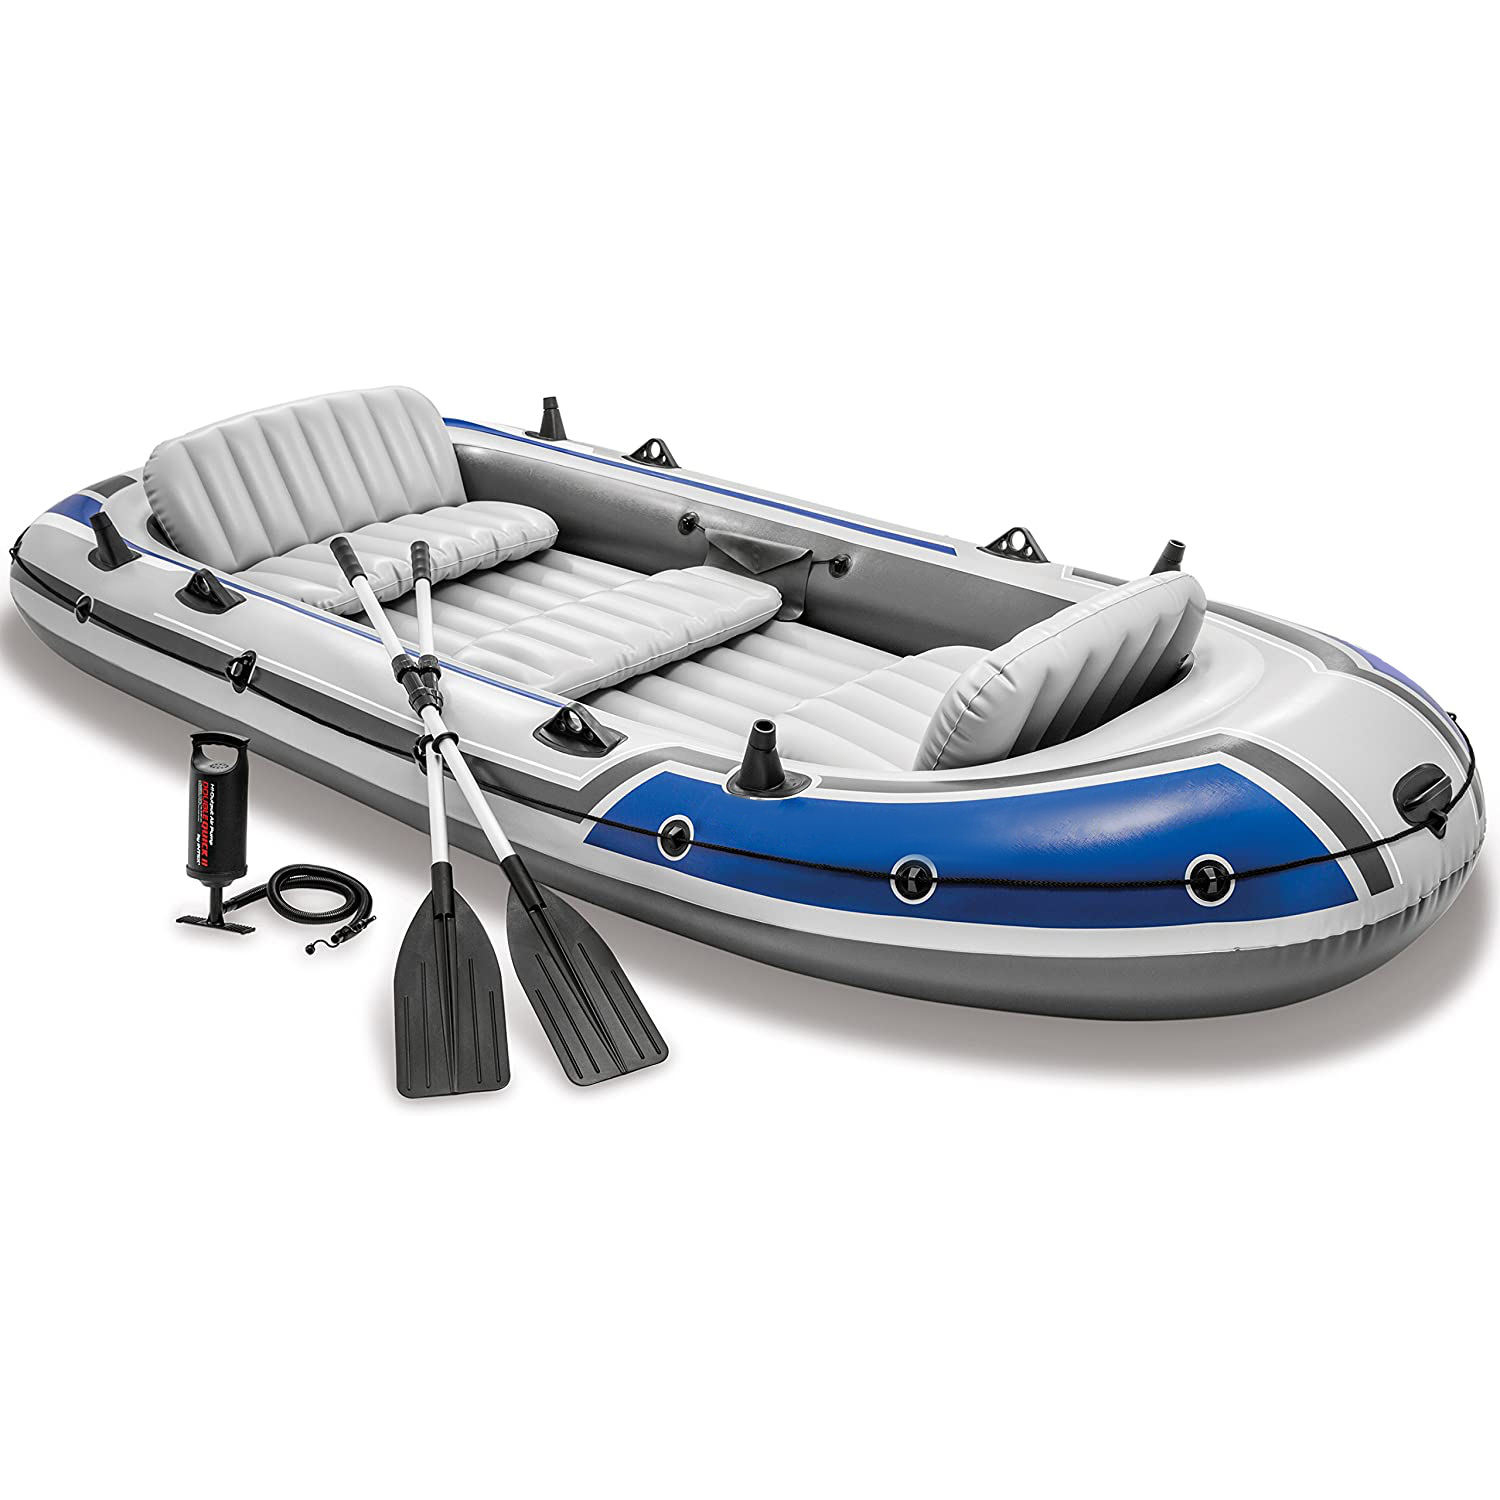 2 persons Inflatable PVC fishing boats